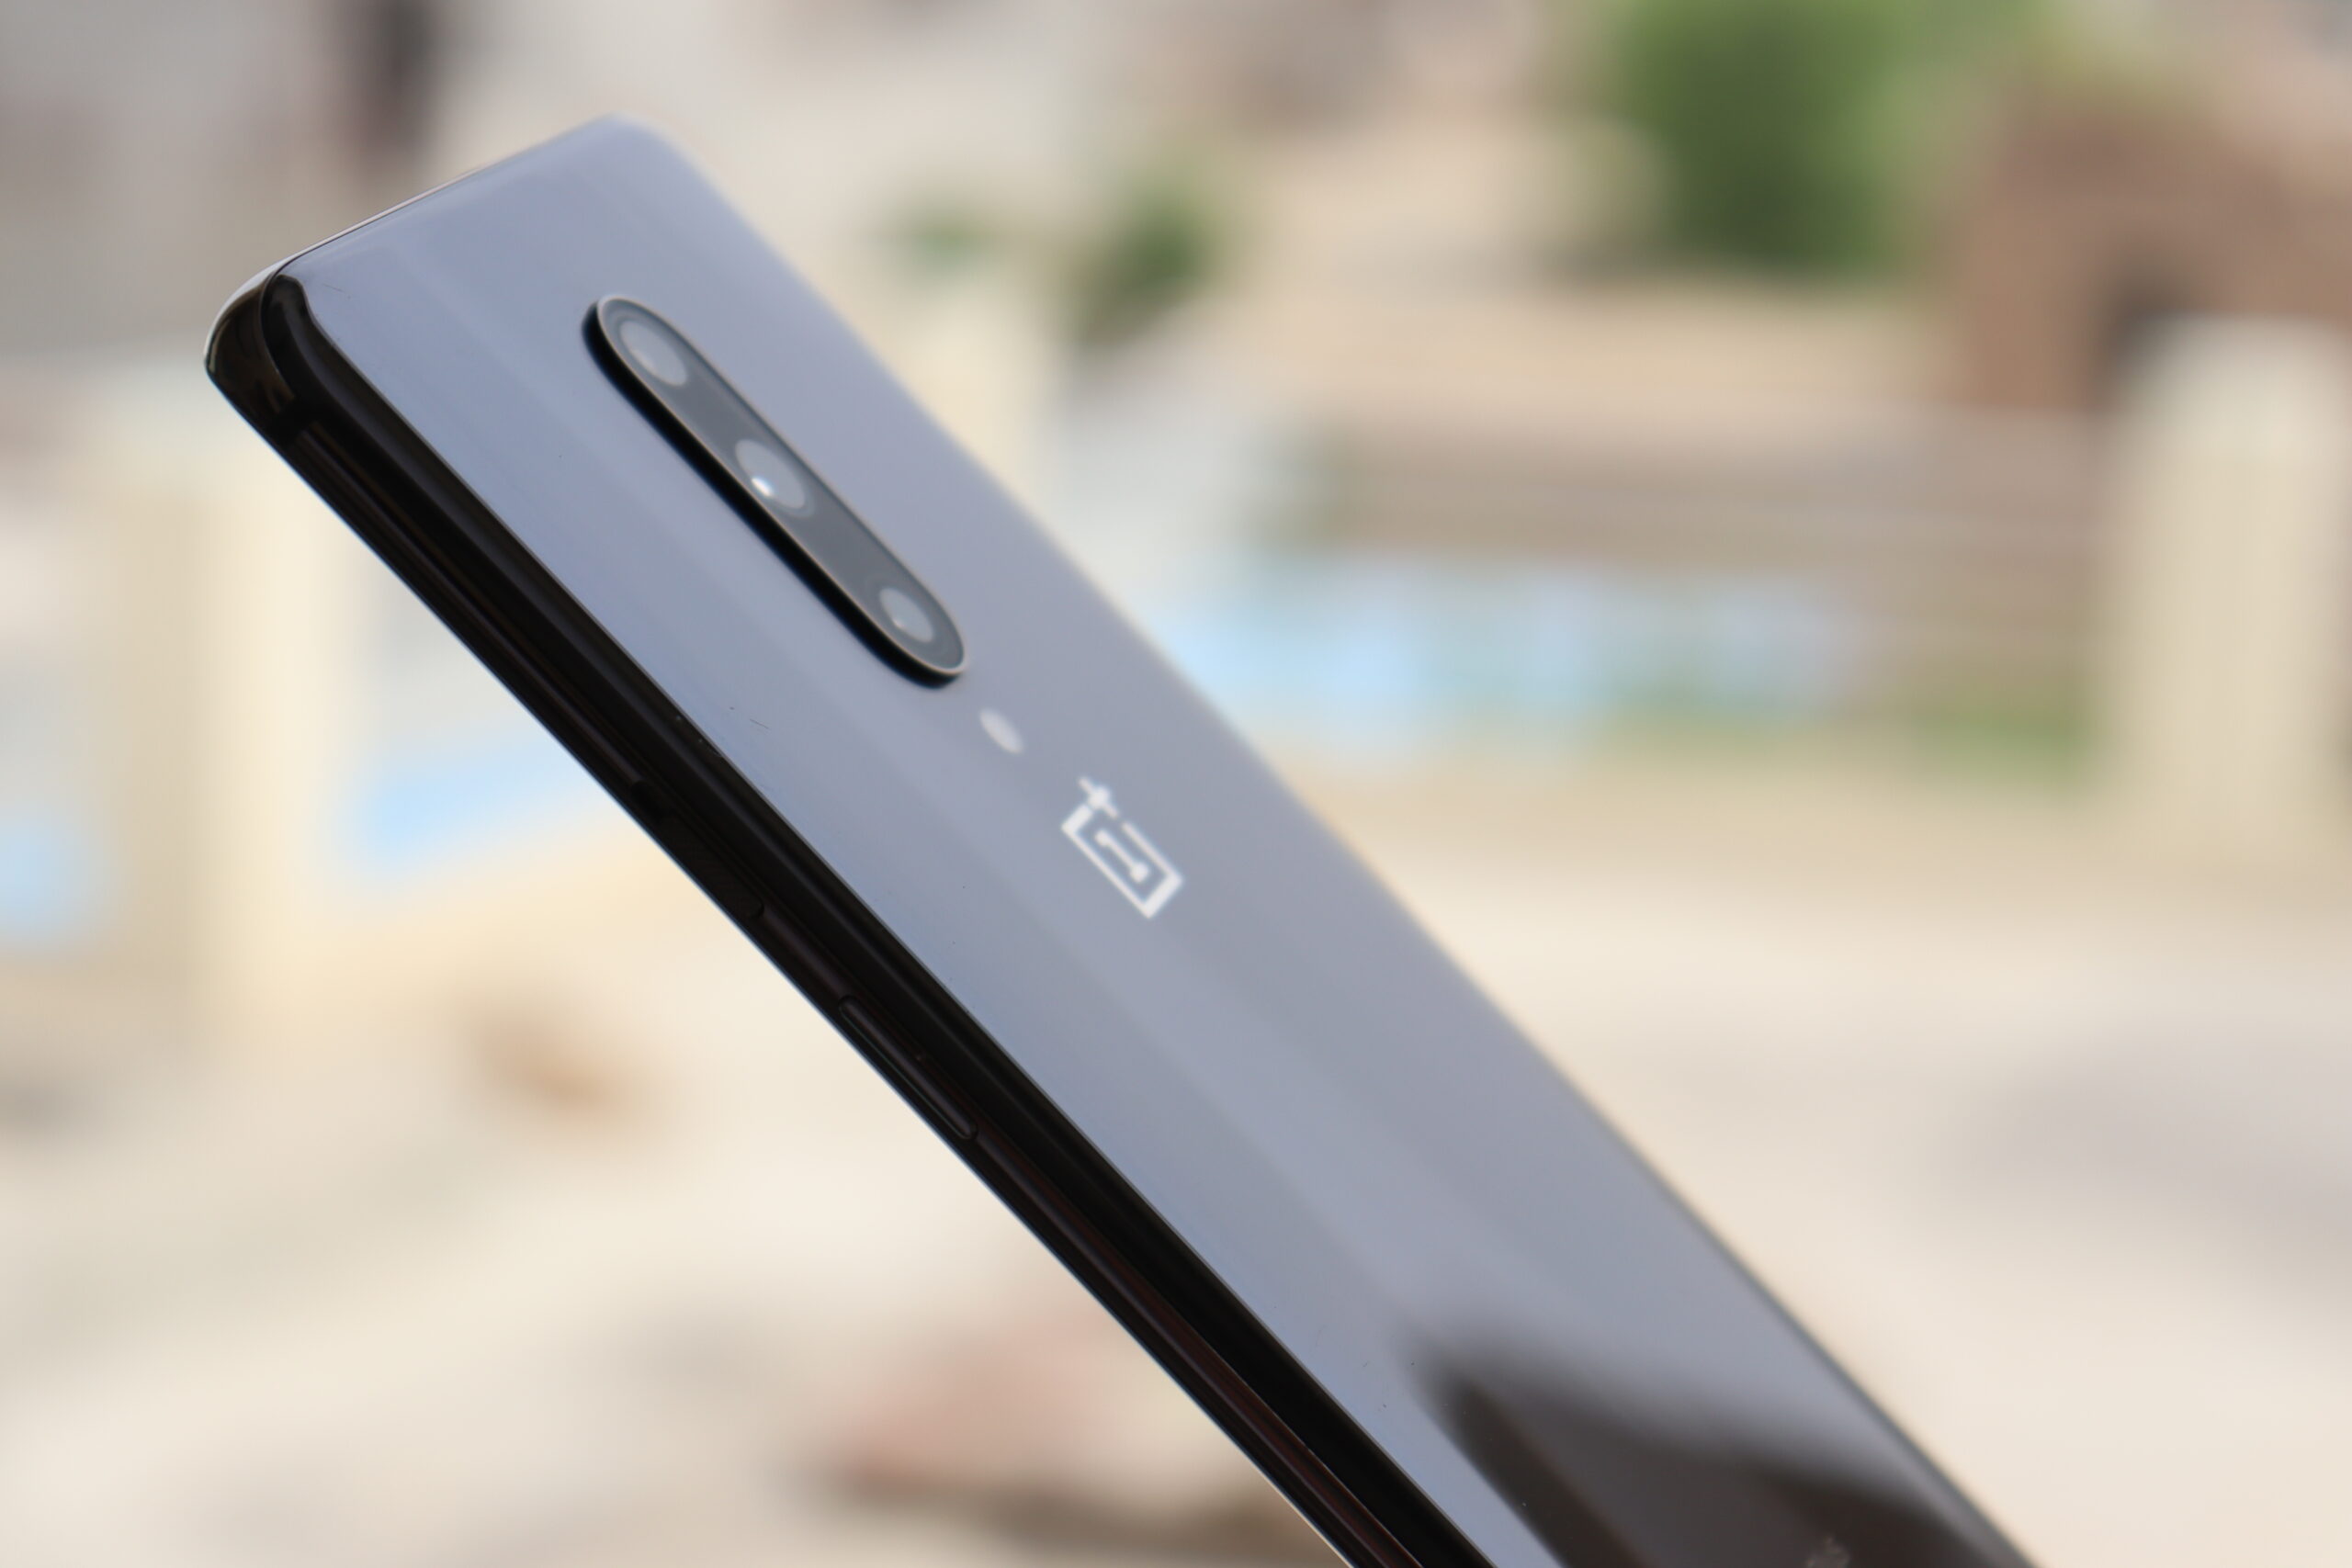 Oneplus rolling out Hydrogen OS 11.0.3.1 for Oneplus 7 & 7T Series